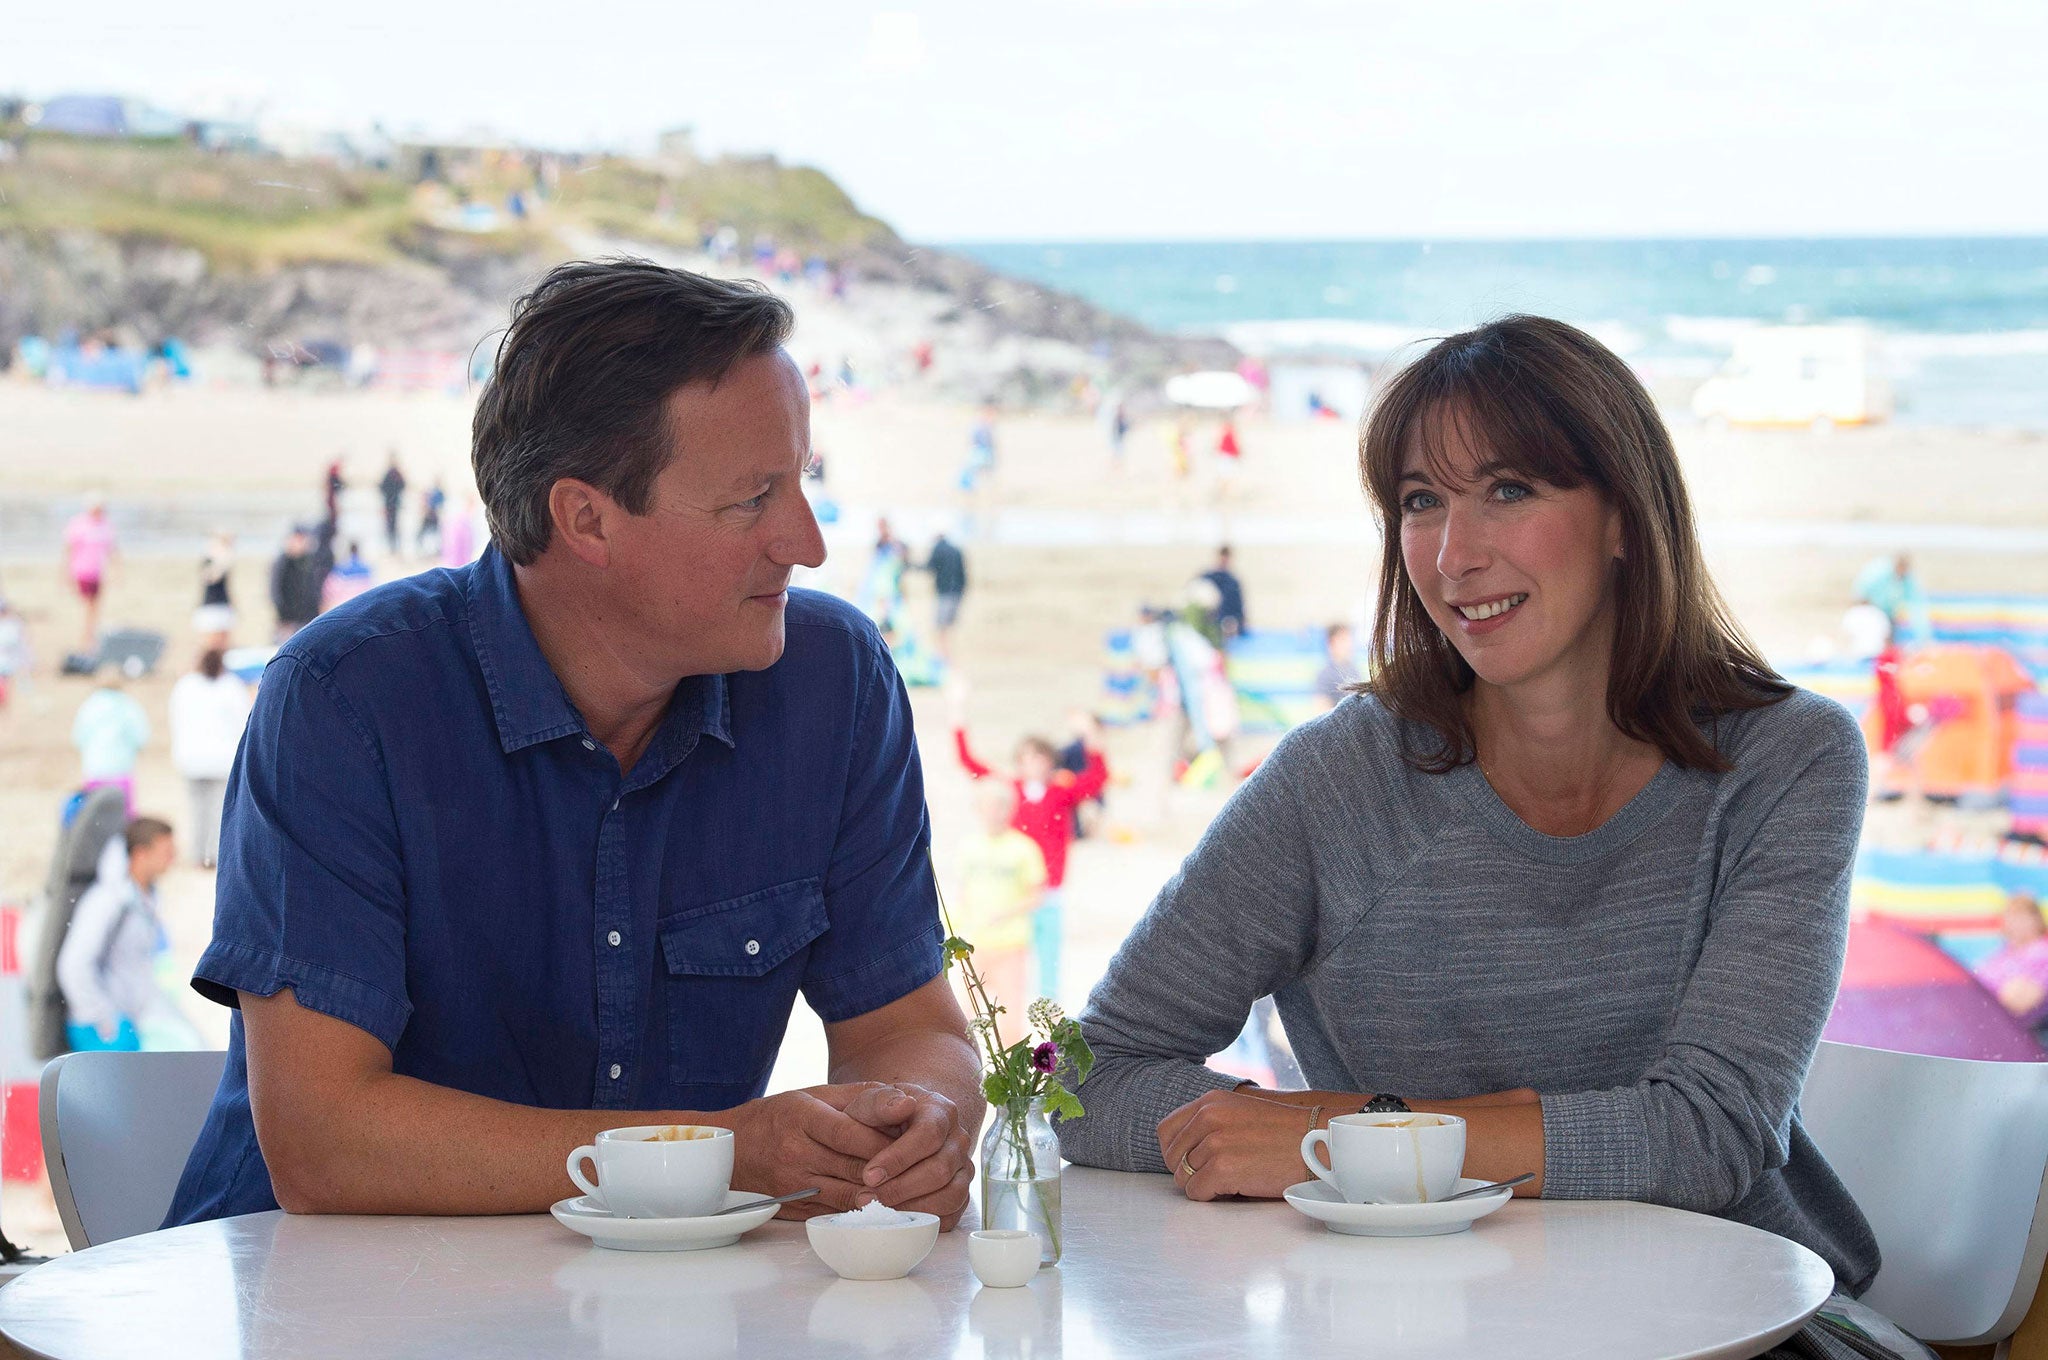 David Cameron and his wife Samantha pose for a photograph during their holiday in Polzeath, Cornwall